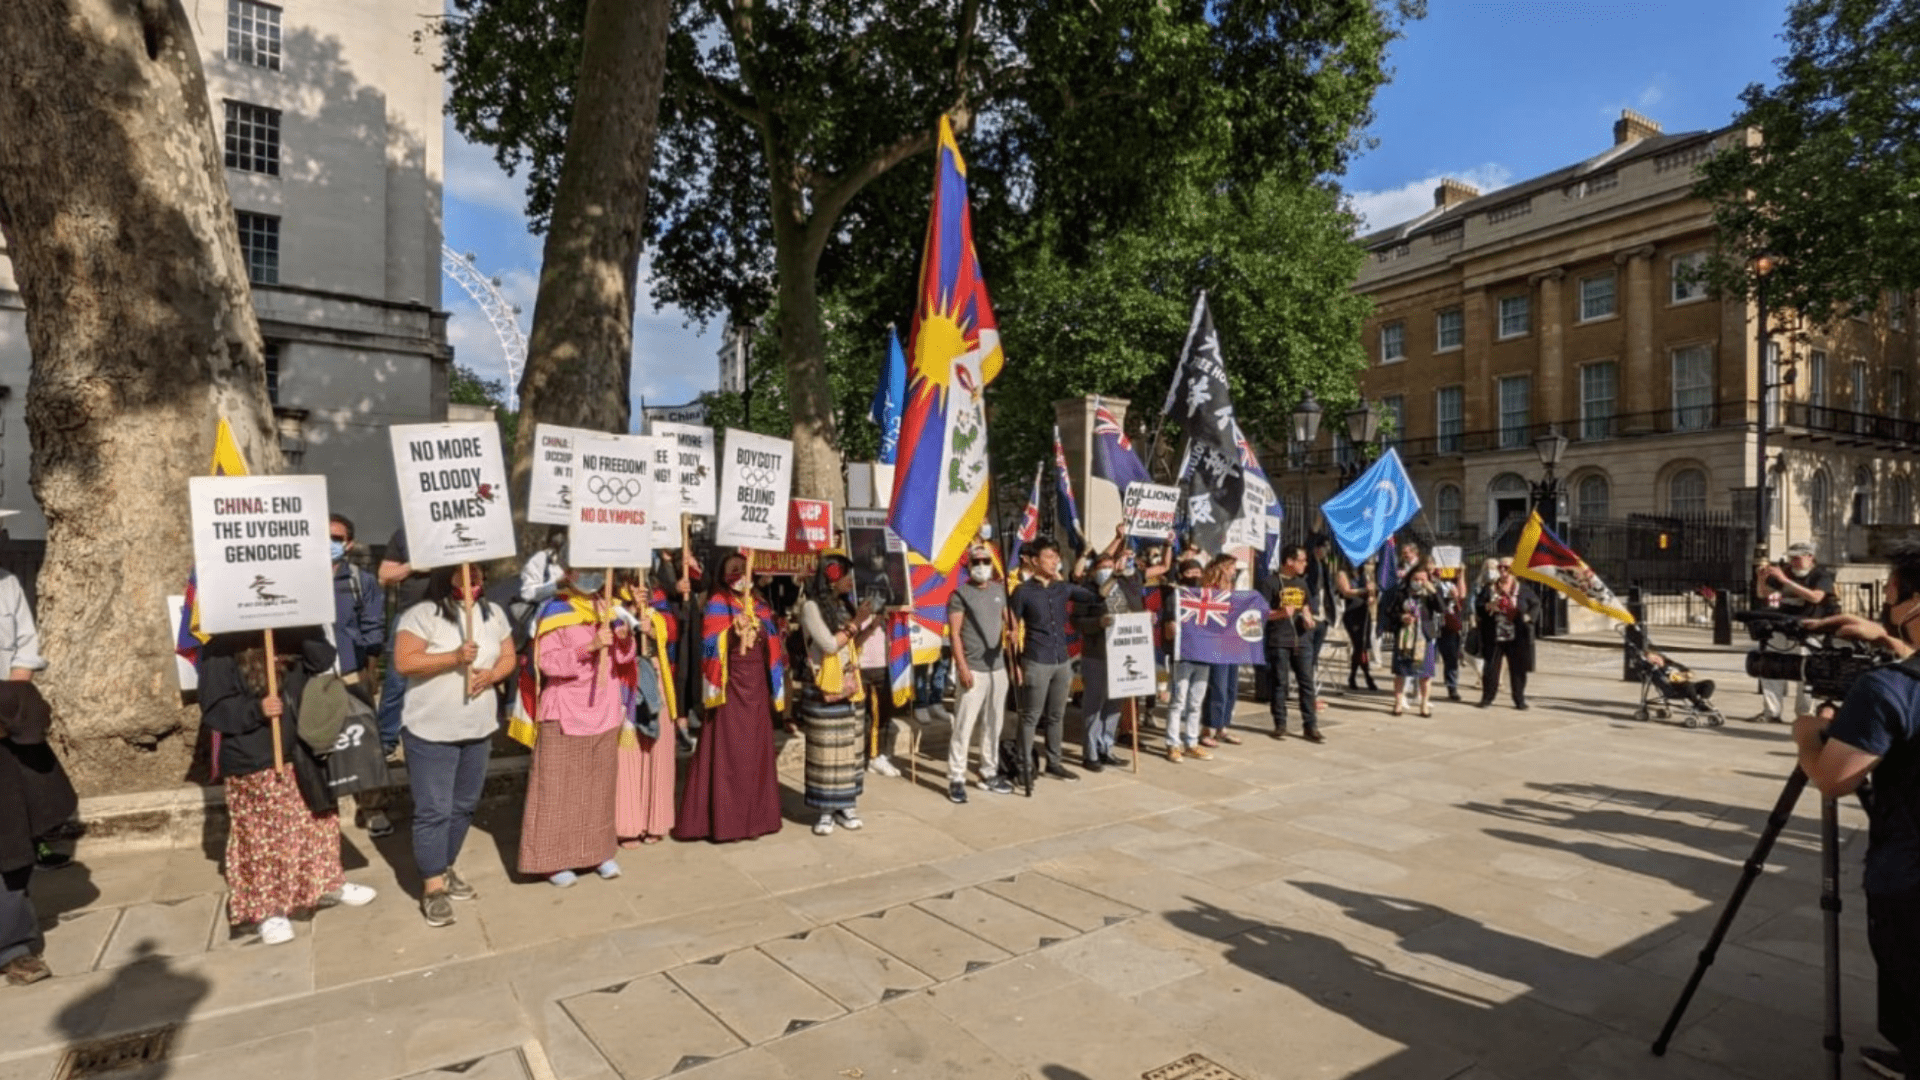 Protesters stand opposite Downing Street calling for a boycott of Beijing 2022